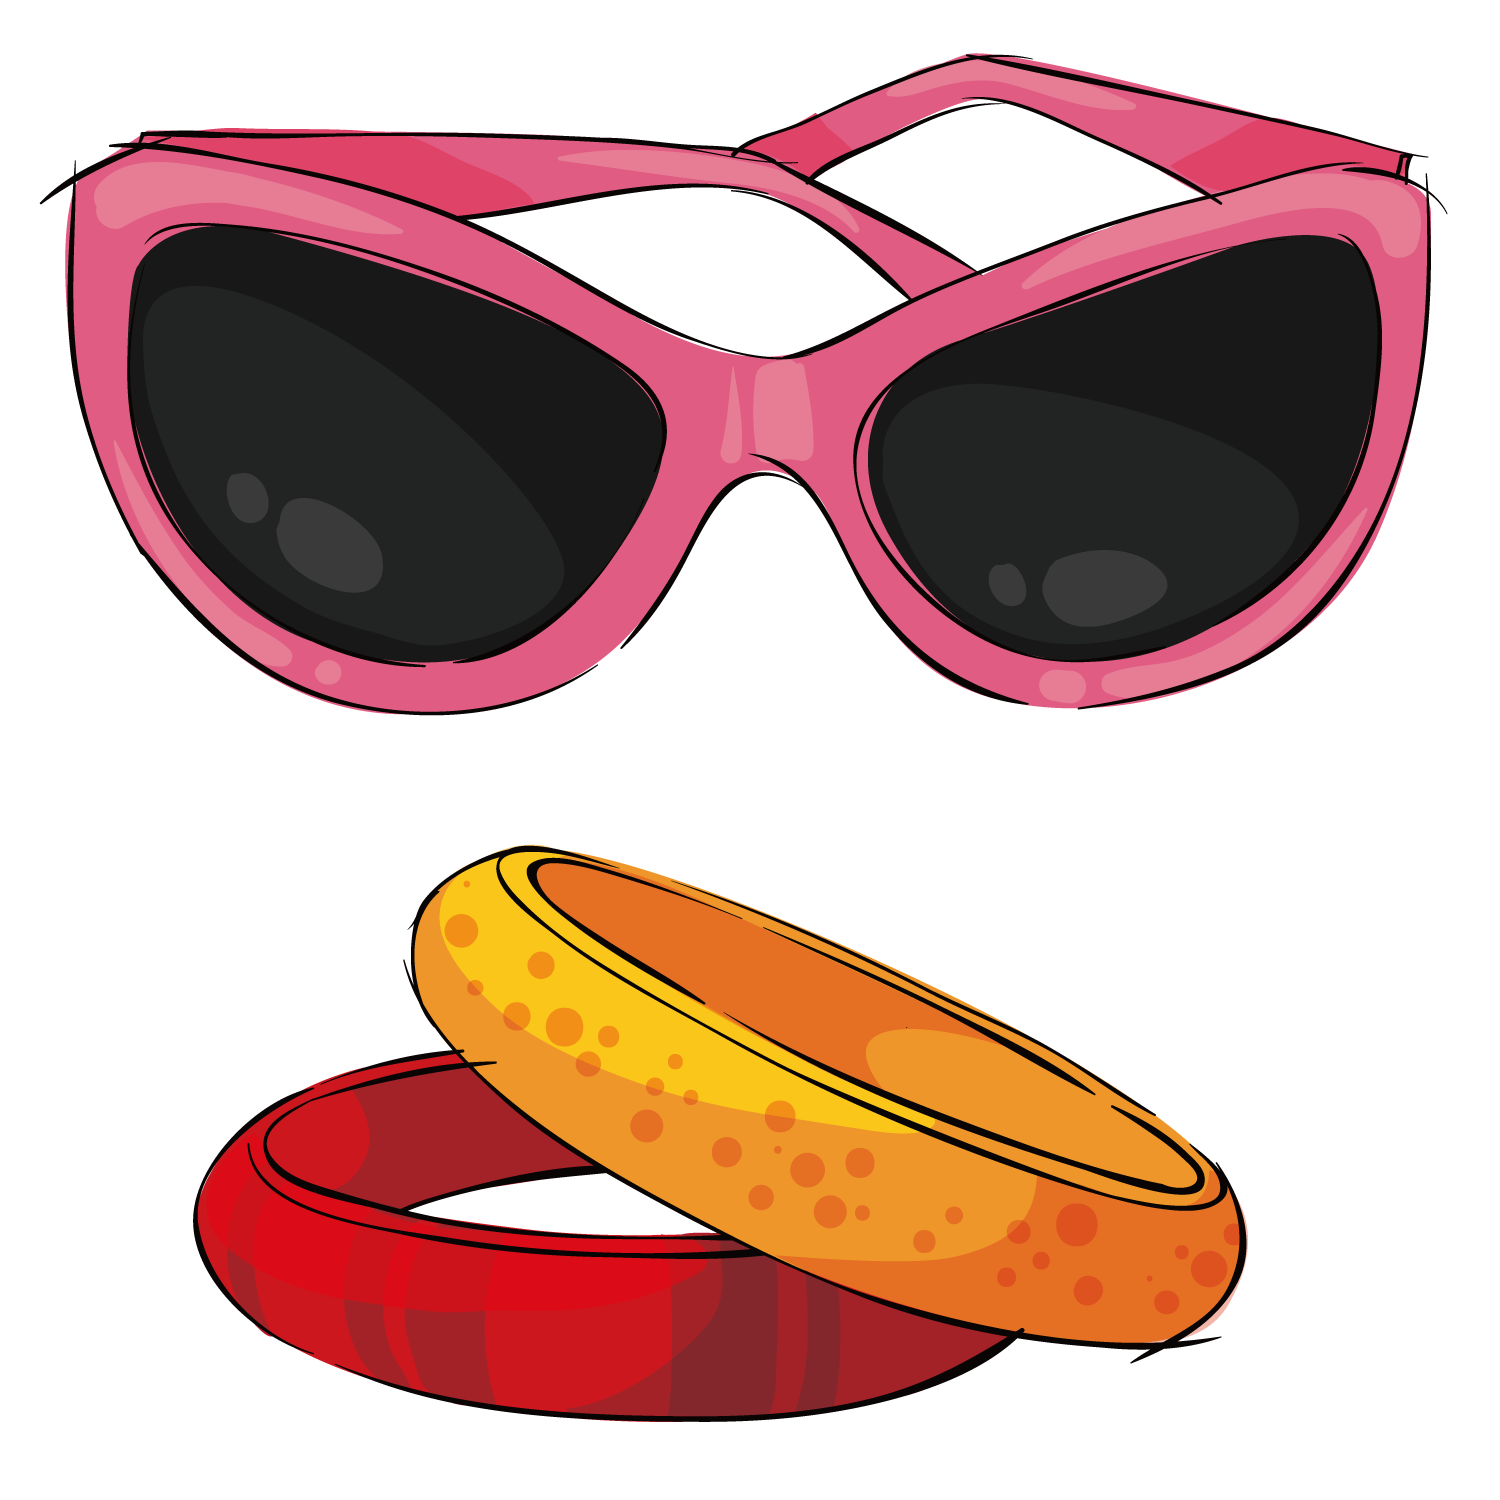 And Sunglasses Jadeite Bracelets PNG File HD Clipart